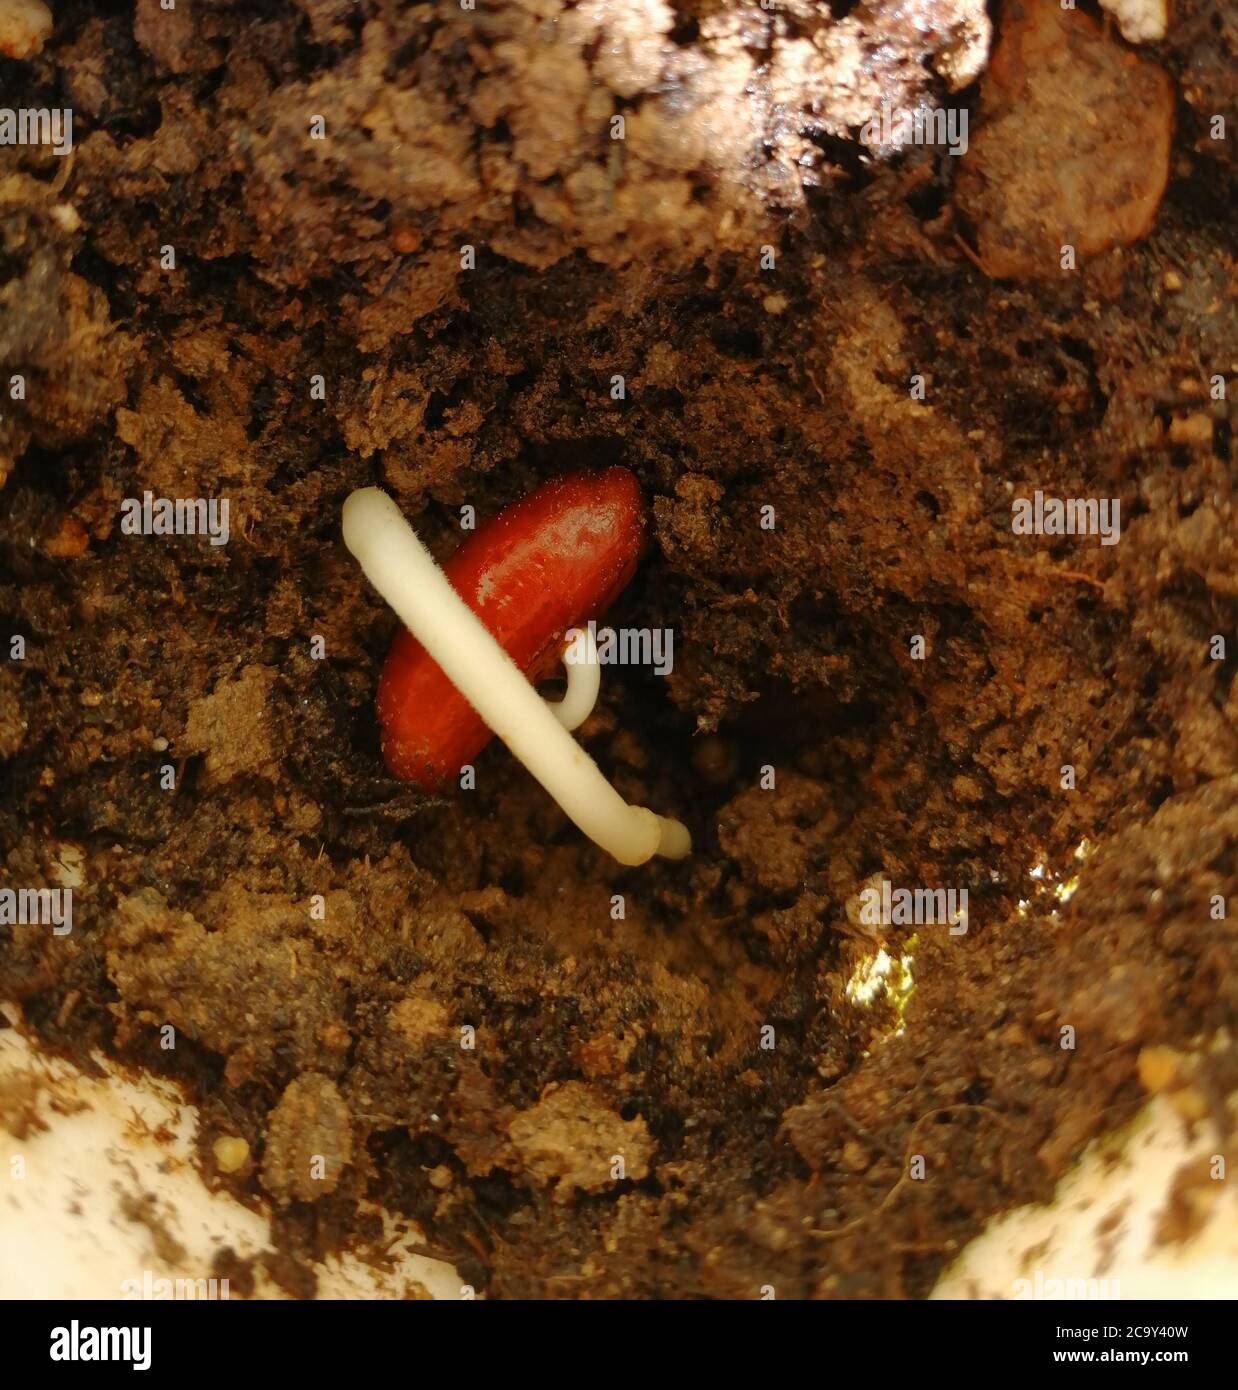 This is a date stone that has sprouted. Germination of the date for a month. Stock Photo